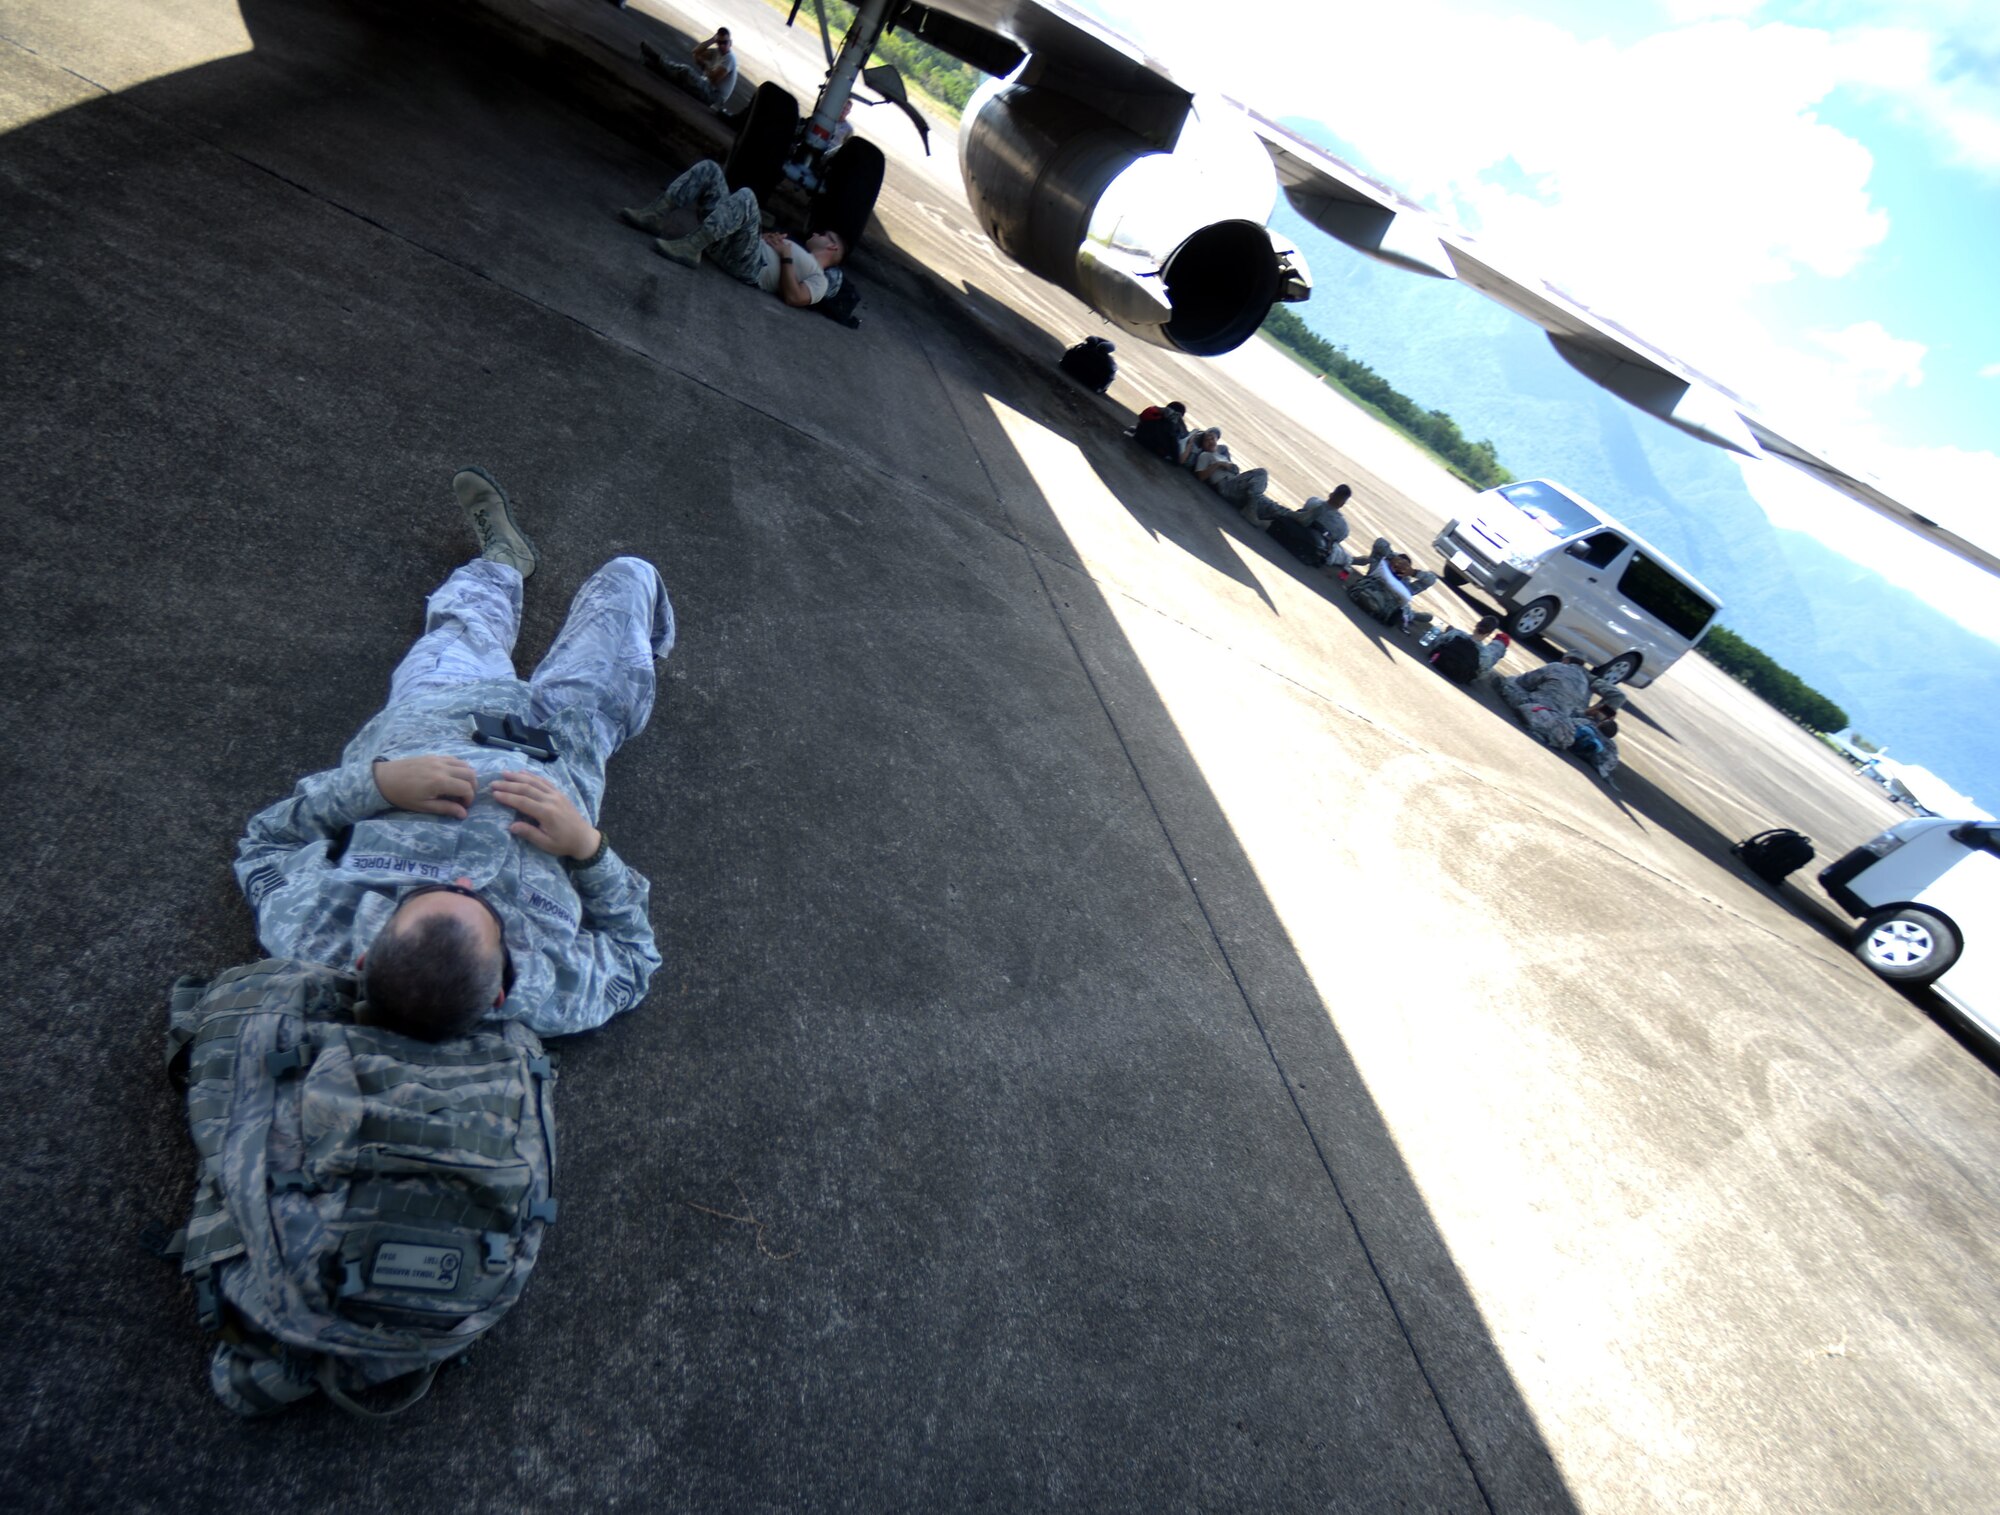 New Horizons Honduras 2015 training exercise personnel wait in the shade of an aircraft for their flight back to the United States from Base Aerea Coronel Hector Caraccioli Moncada in La Ceiba, Honduras, Aug. 28, 2015. Vehicles, equipment and personnel that were part of the New Horizons exercise redeployed to Hurlburt Field, Fla., while all remaining equipment will return via sealift. New Horizons was launched in the 1980s and is an annual joint humanitarian assistance exercise that U.S. Southern Command conducts with a partner nation in Central America, South America or the Caribbean. The exercise improves joint training readiness of U.S. and partner nation civil engineers, medical professionals and support personnel through humanitarian assistance activities. (U.S. Air Force photo by Capt. David J. Murphy/Released)